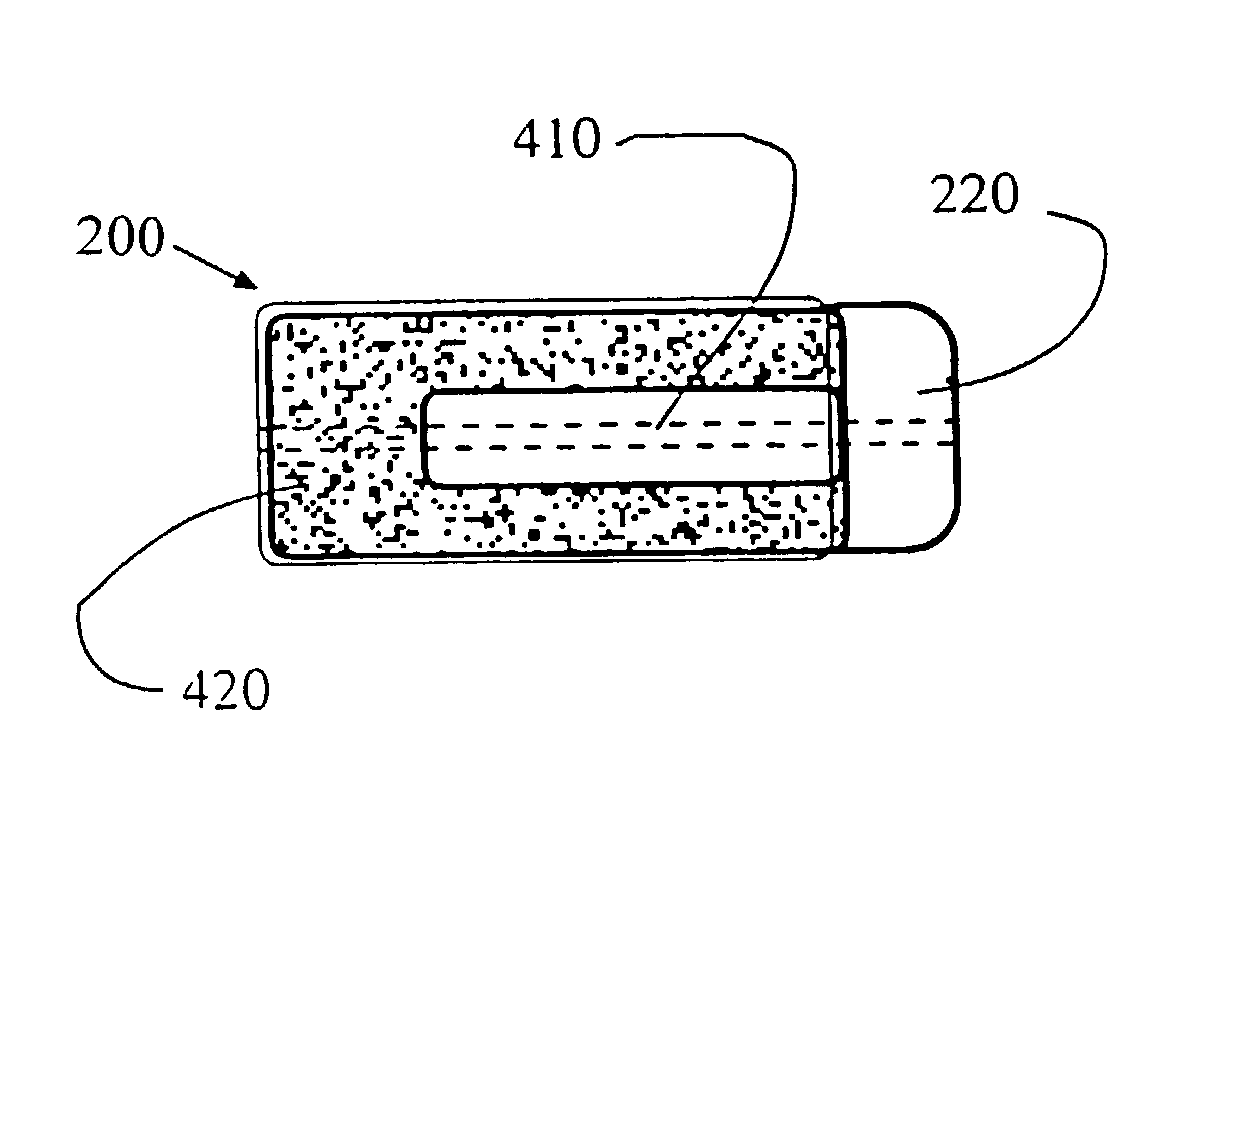 Method and apparatus for treating osteochondral pathologies